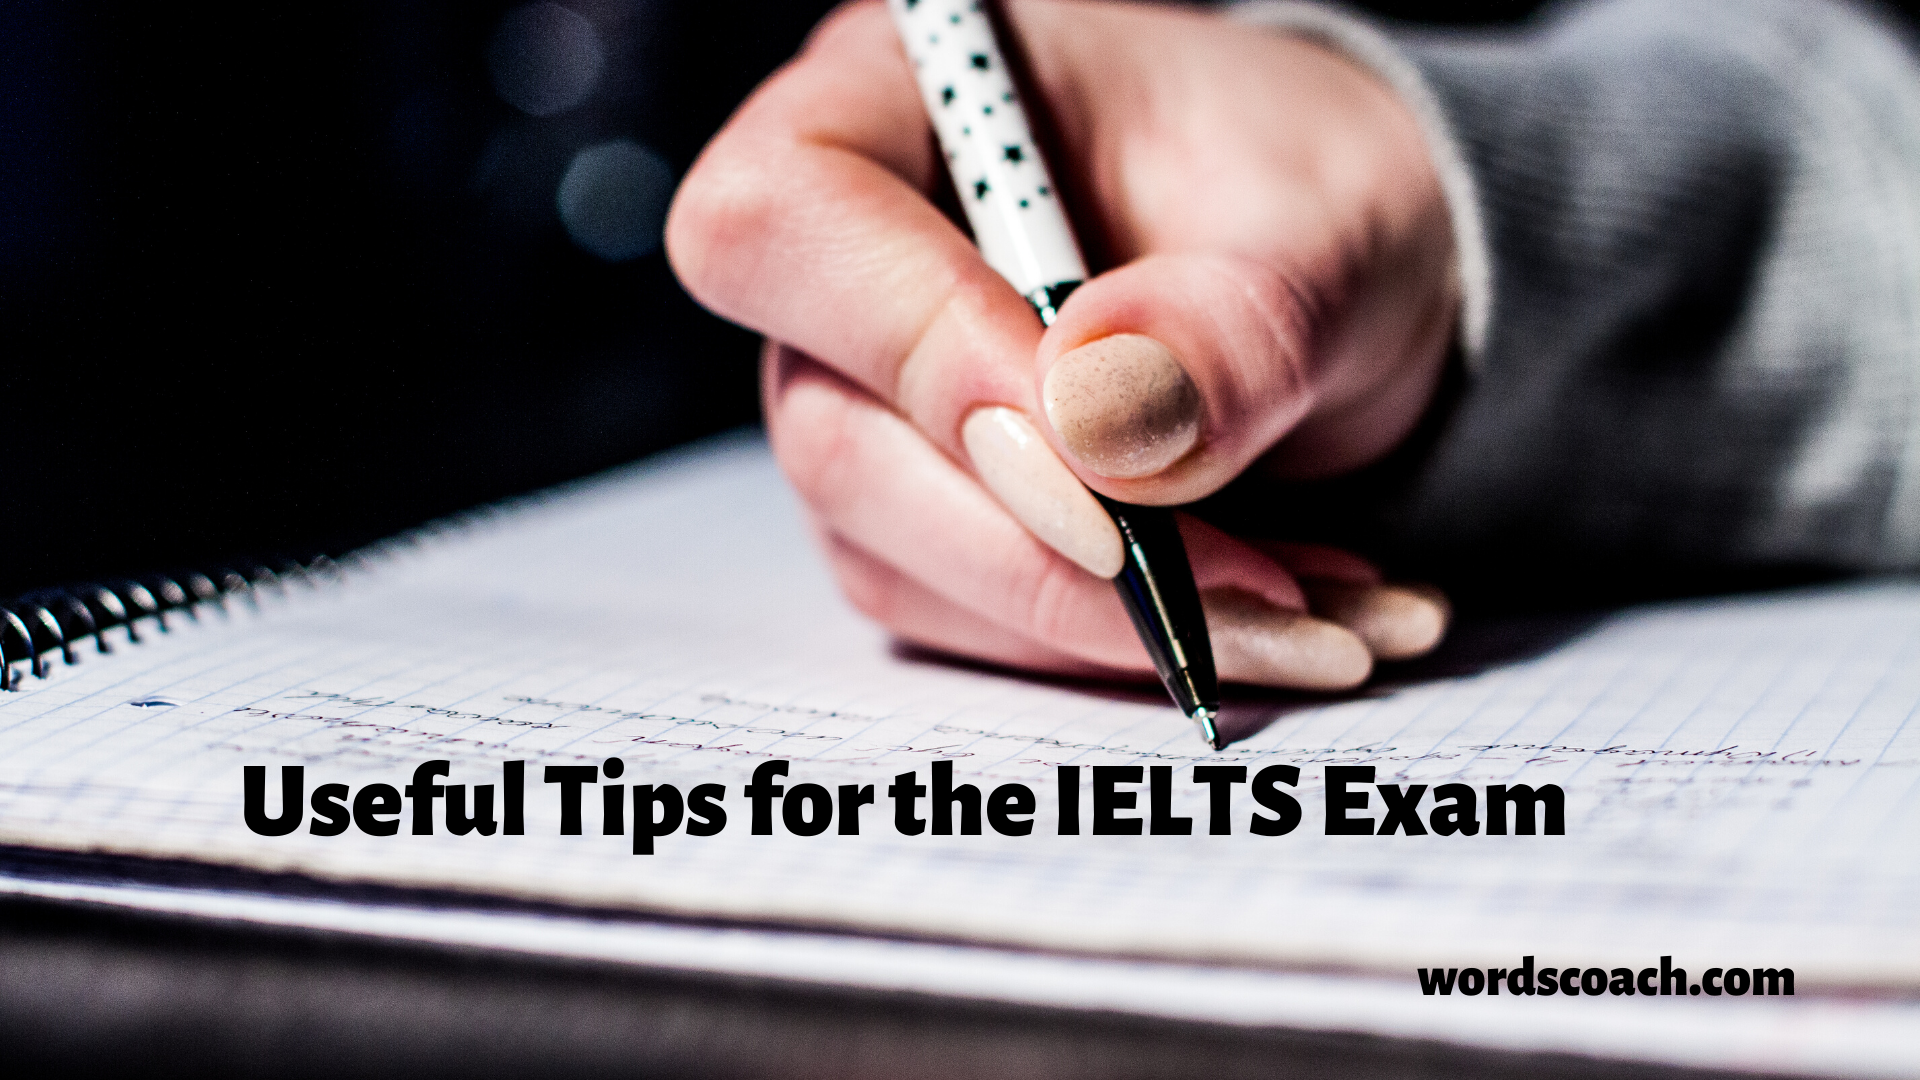 Useful tips for every section of the IELTS exam